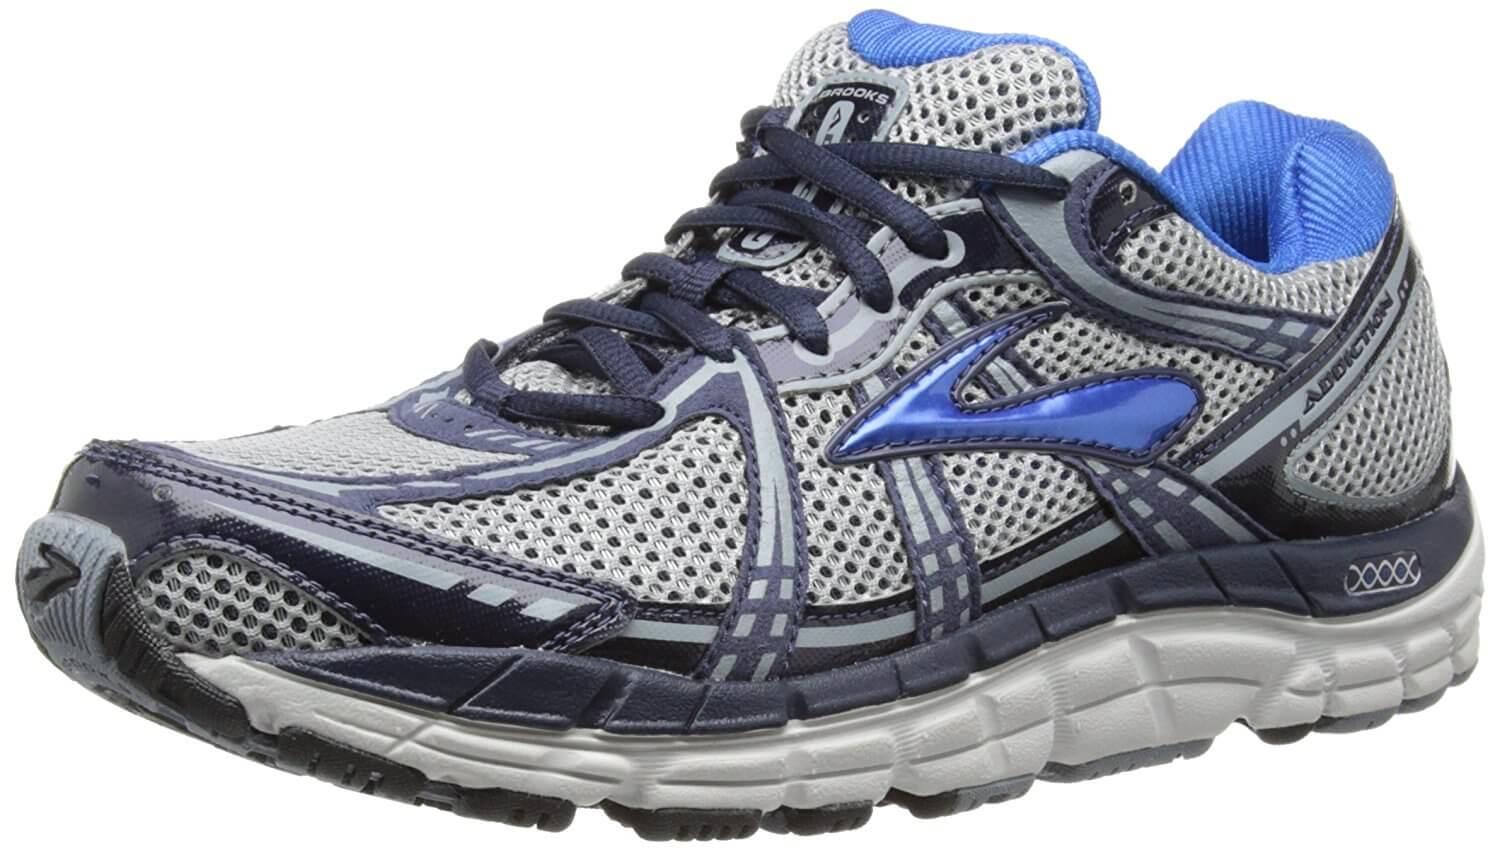 the best brooks running shoes